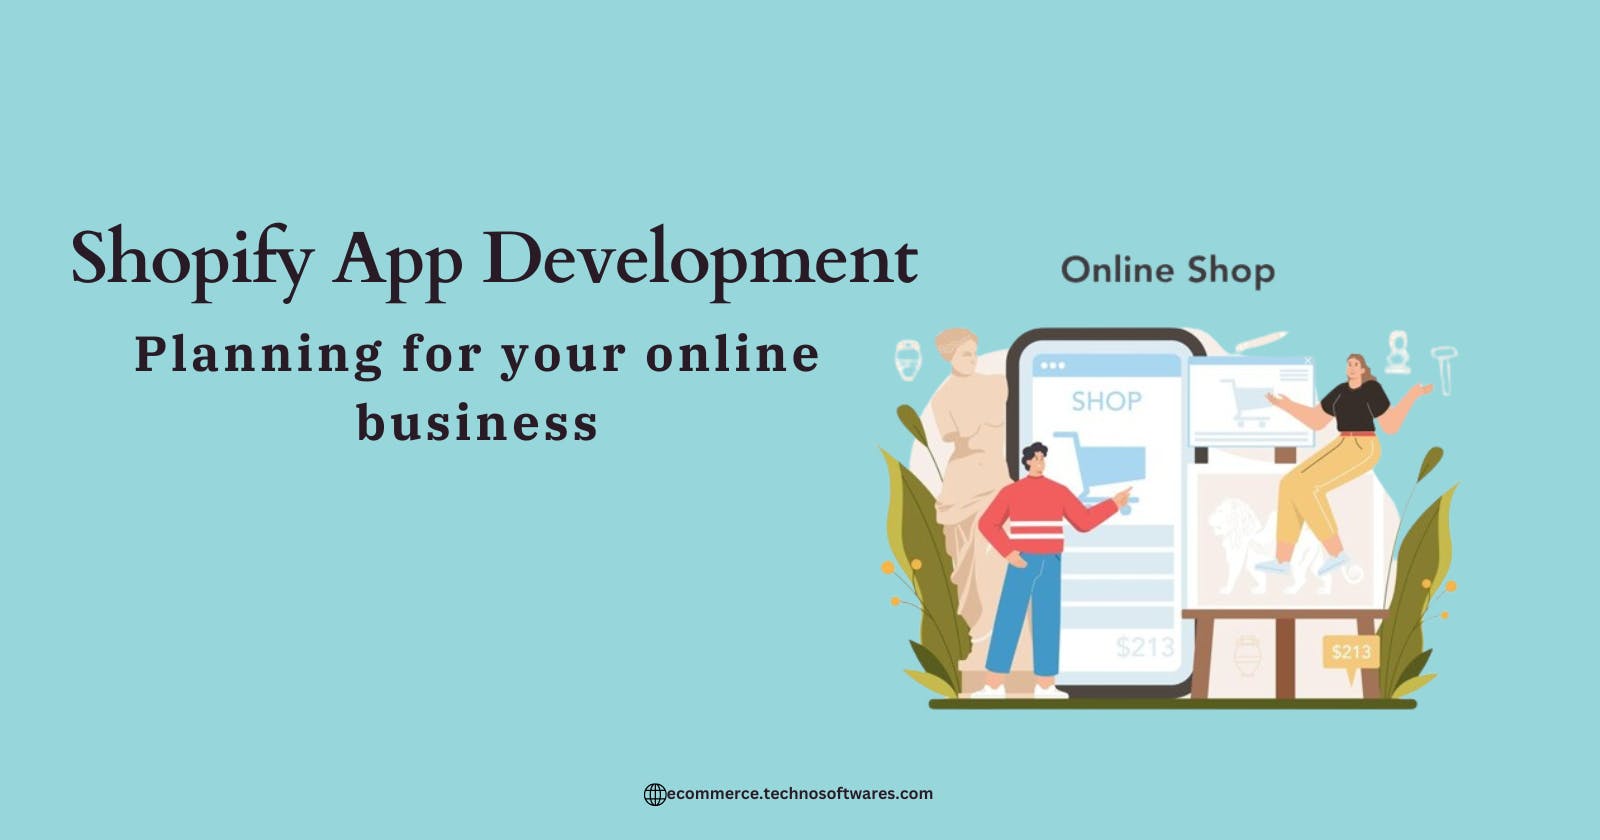 Shopify App Development – Planning for Your Online Business